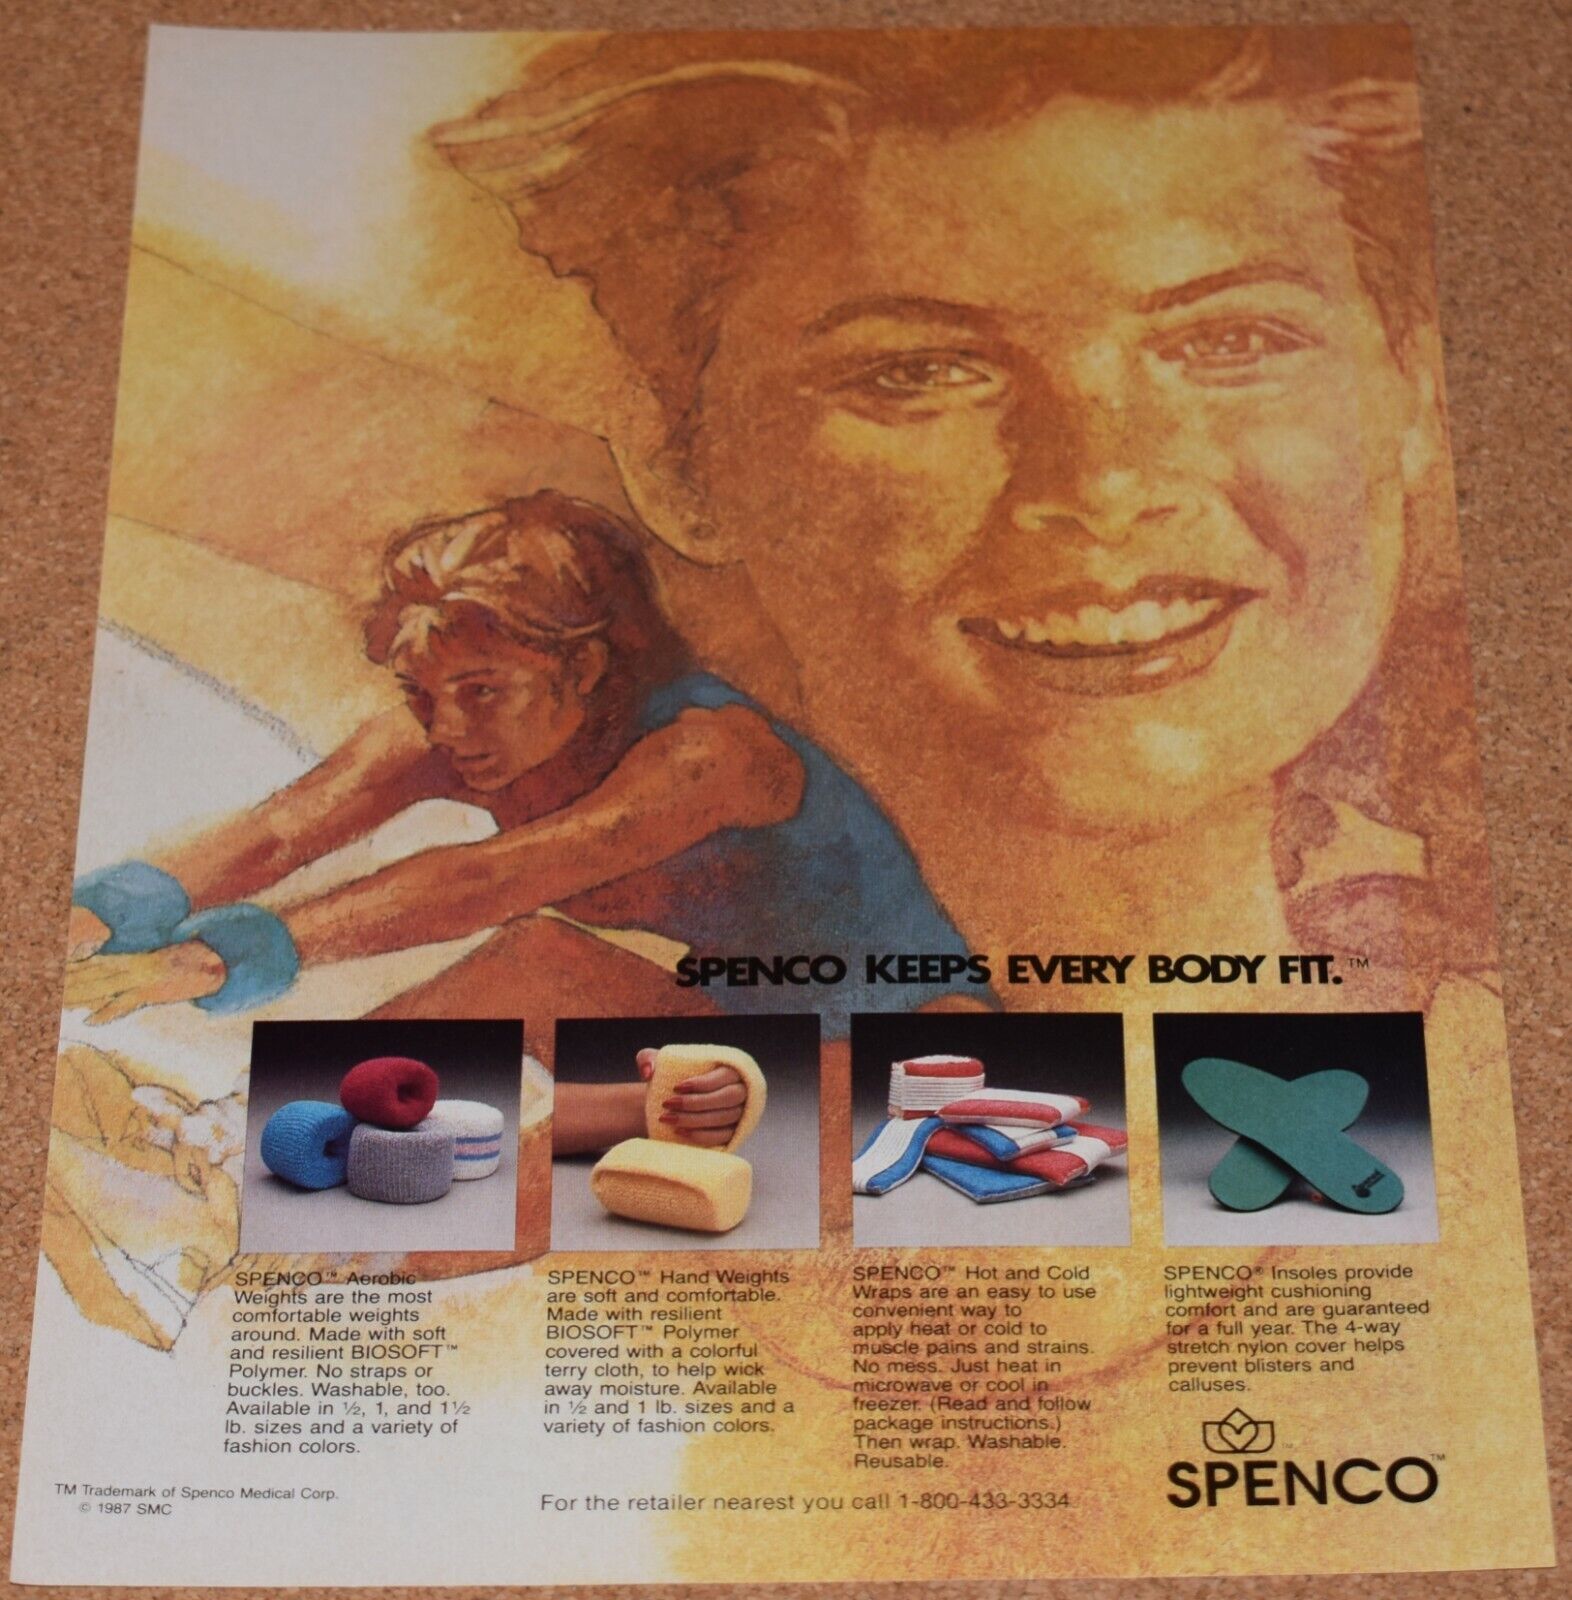 1987 Print Ad Spenco Aerobic Weights Keeps Every Body Fit woman lady workout art